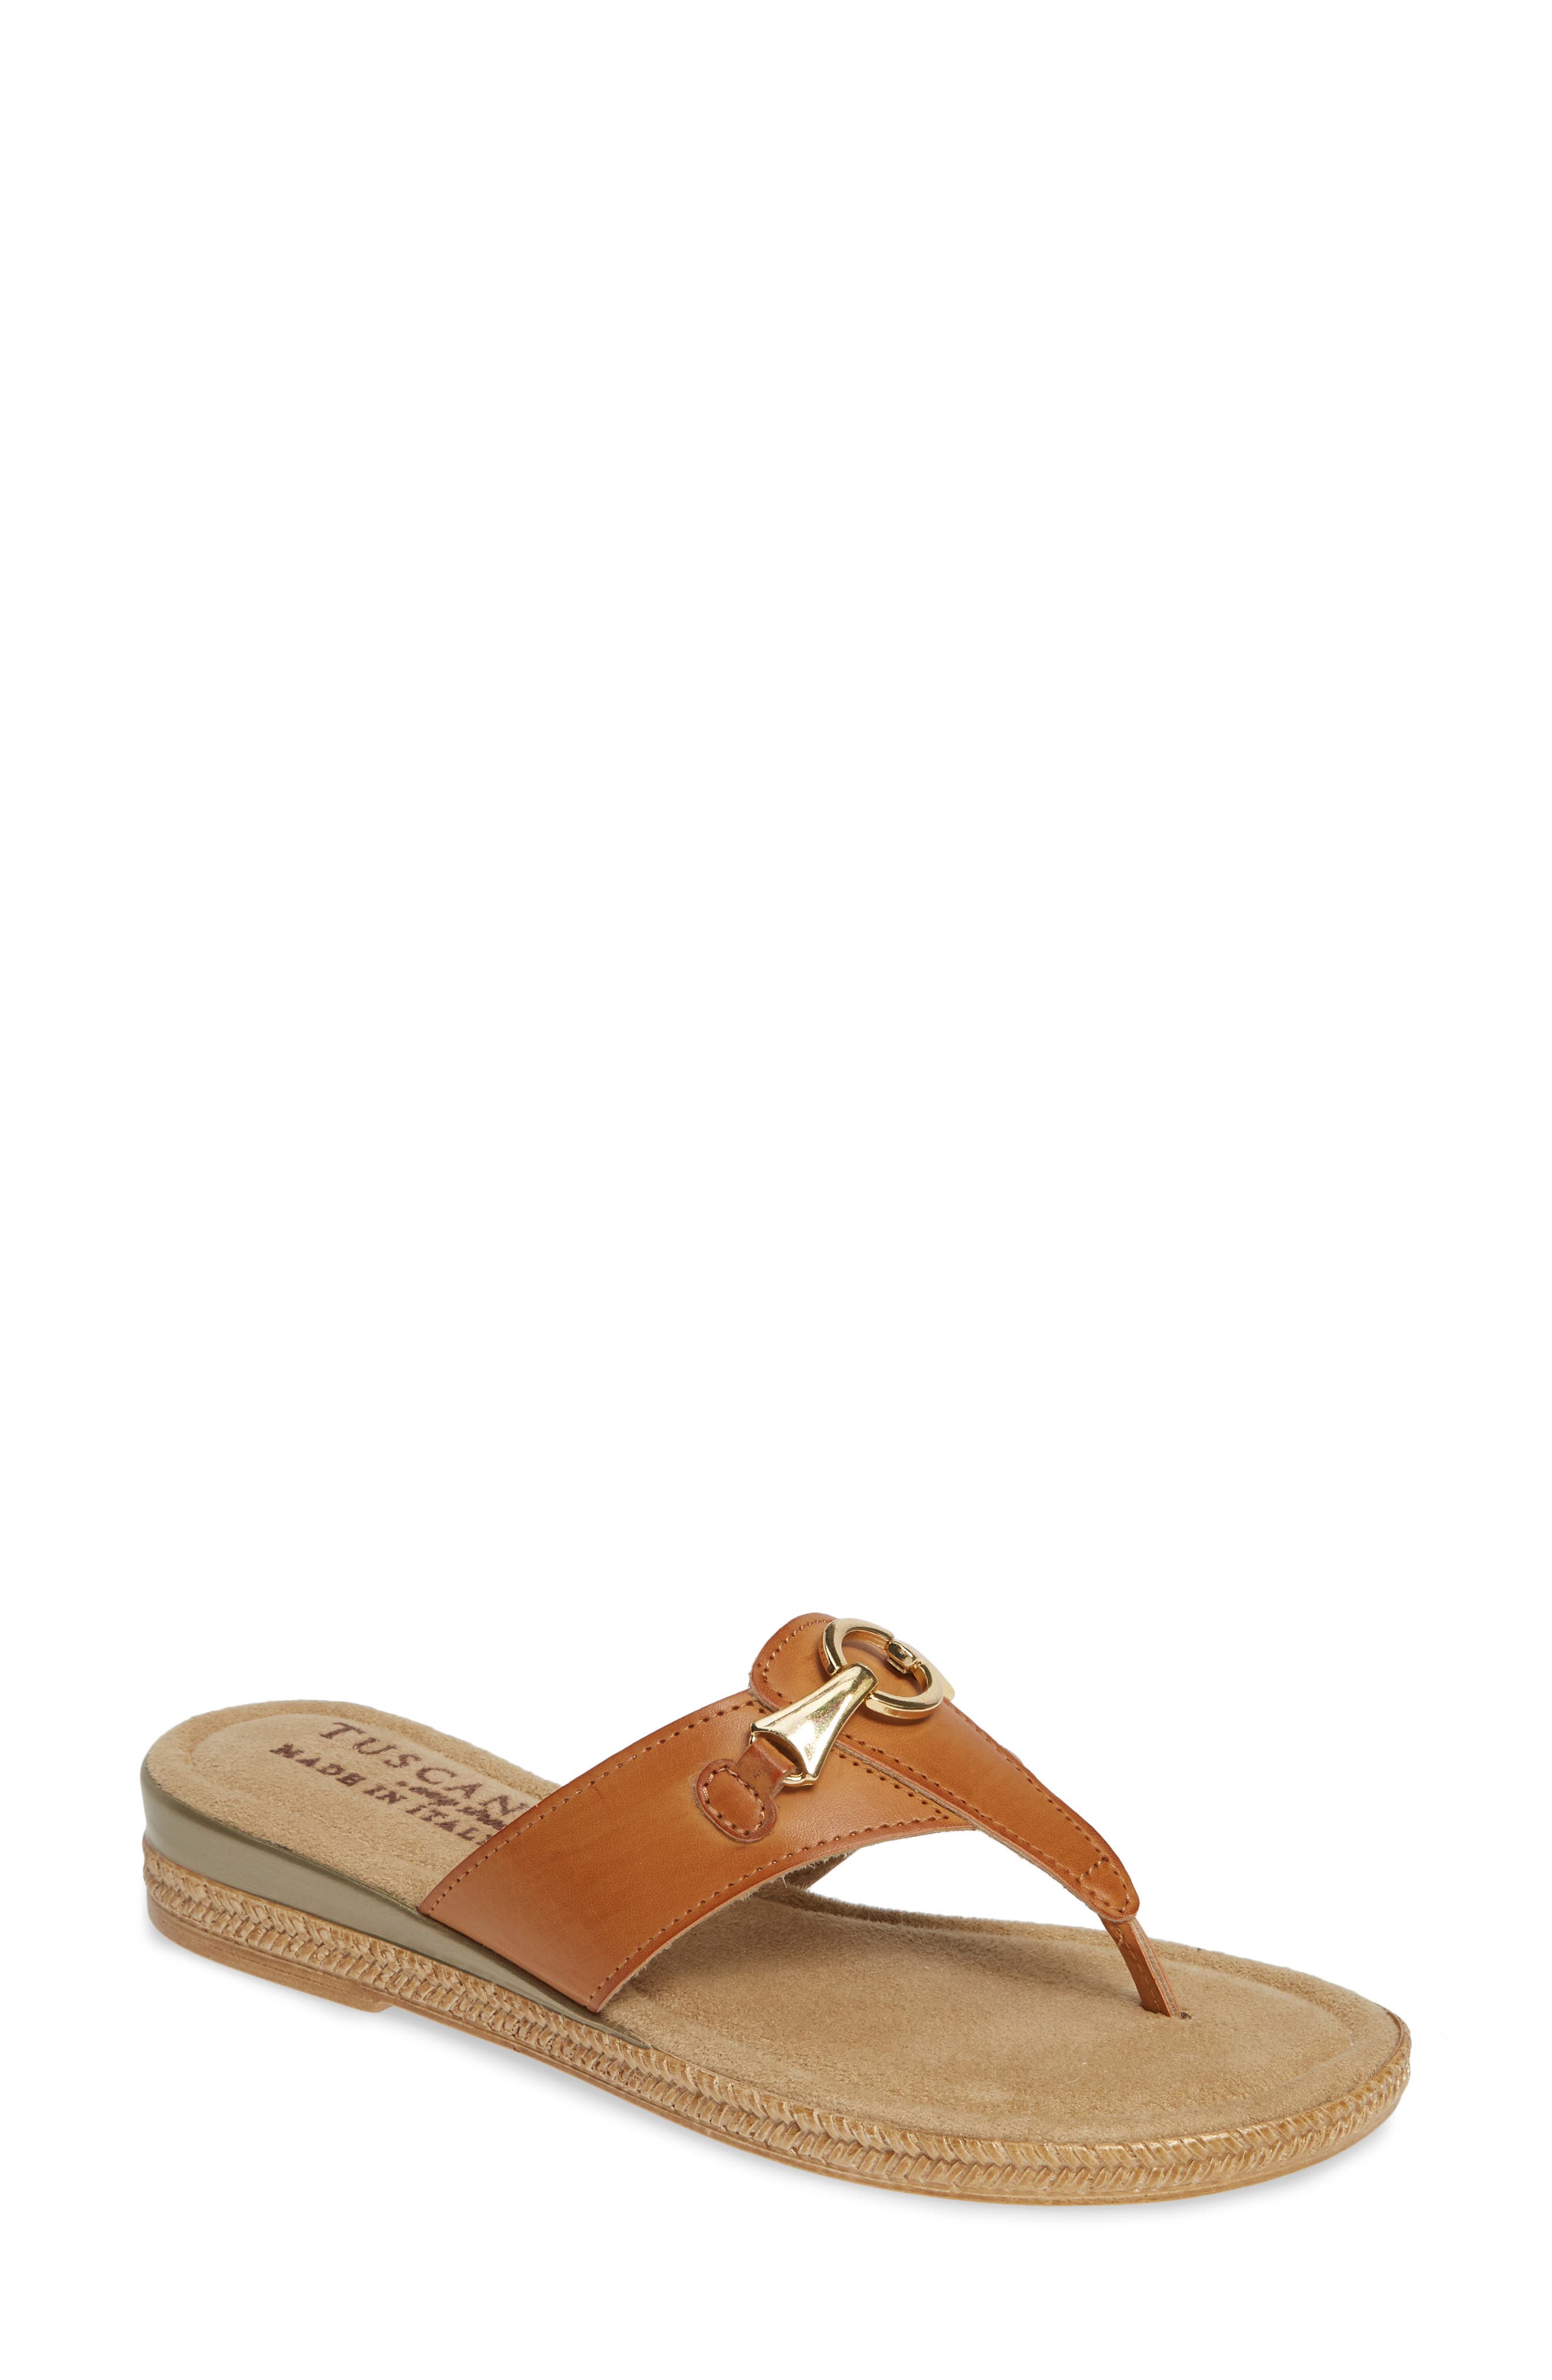 UPC 030000000083 product image for Women's Tuscany By Easy Street Farah Flip Flop | upcitemdb.com